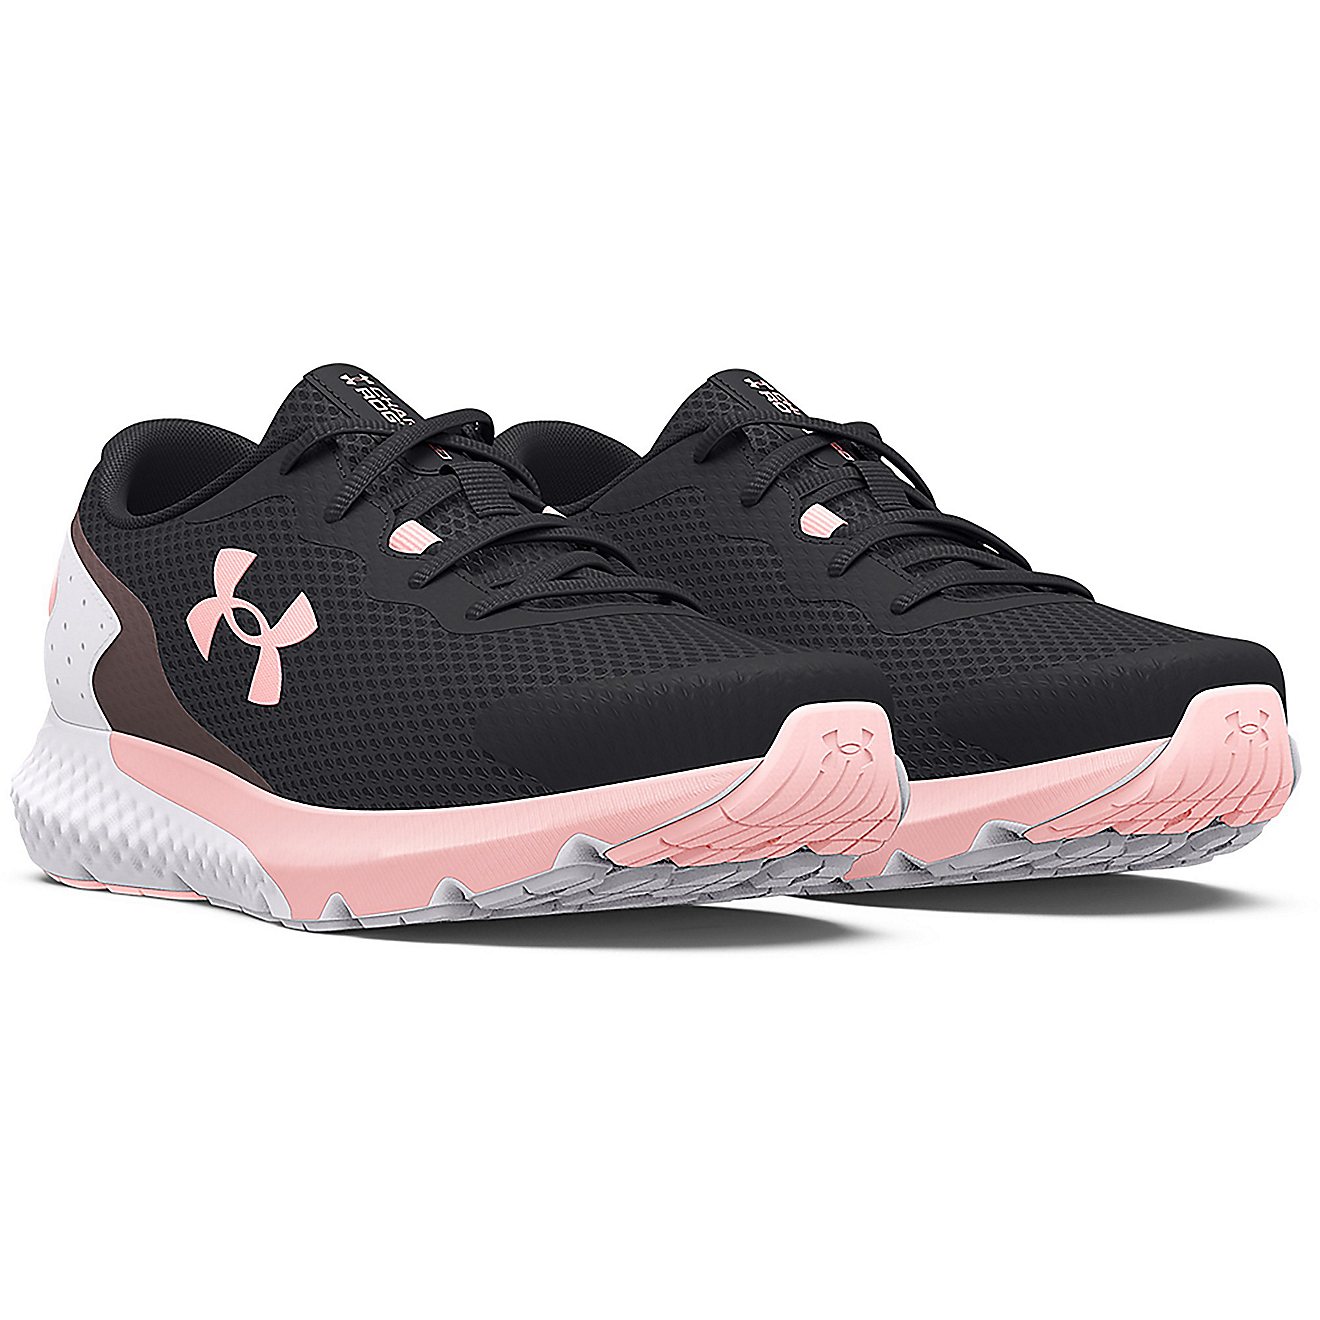 Under Armour Girls' Rogue 3 Shoe | Free Shipping at Academy